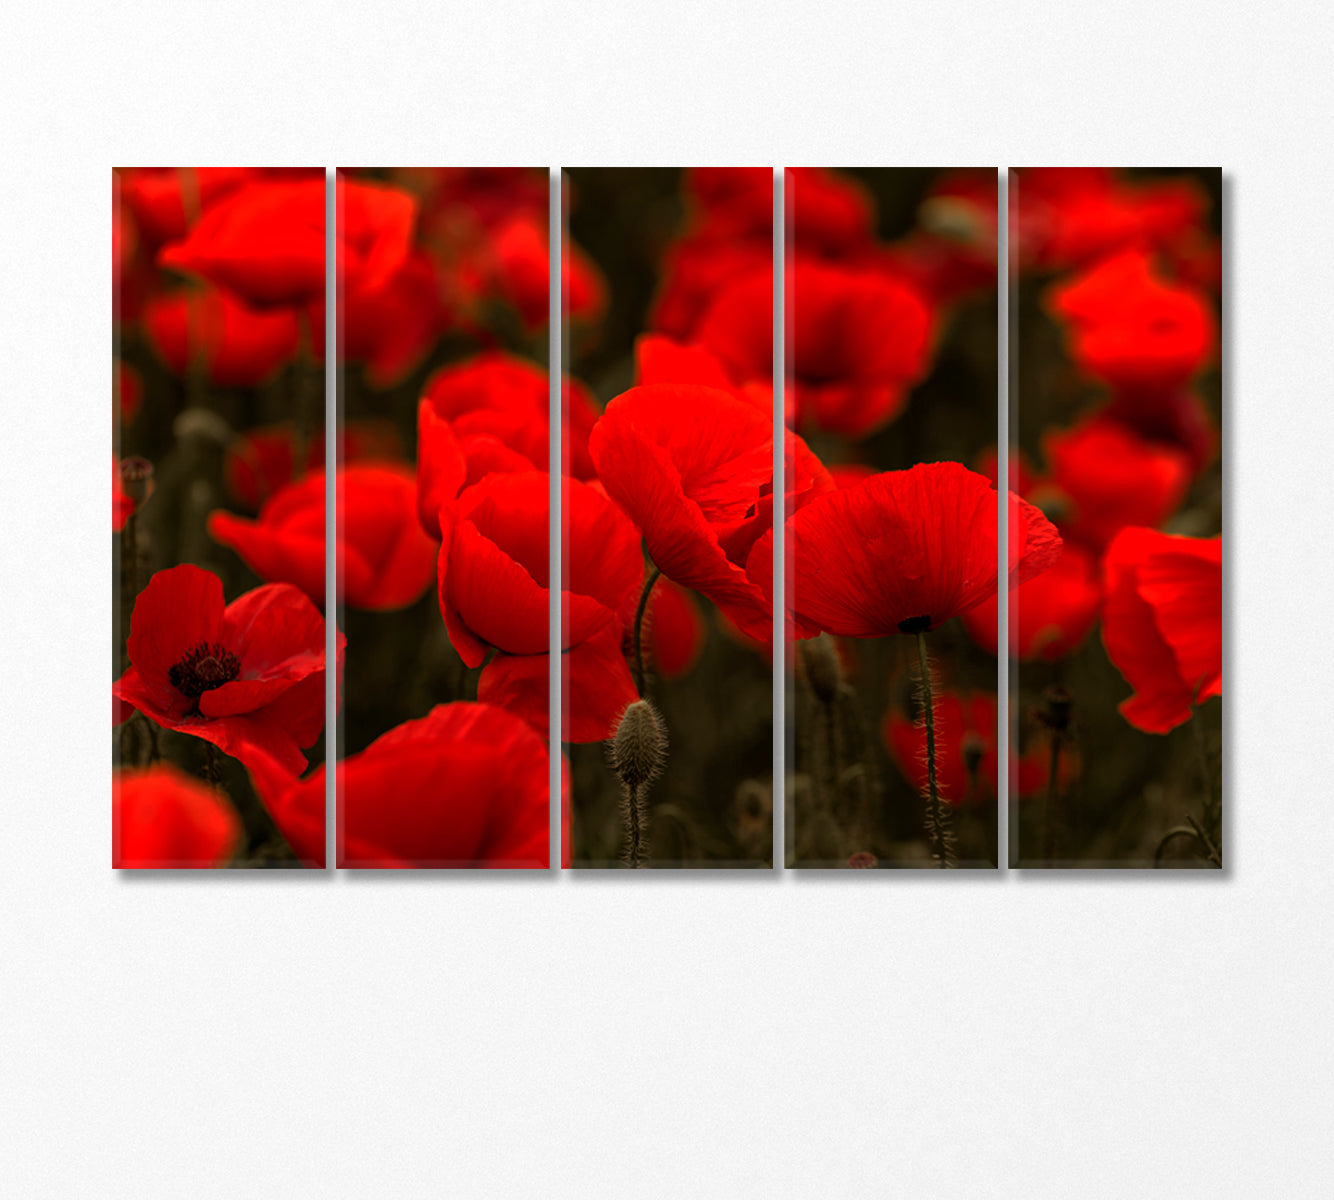 Field of Red Wild Poppies Canvas Print-Canvas Print-CetArt-5 Panels-36x24 inches-CetArt